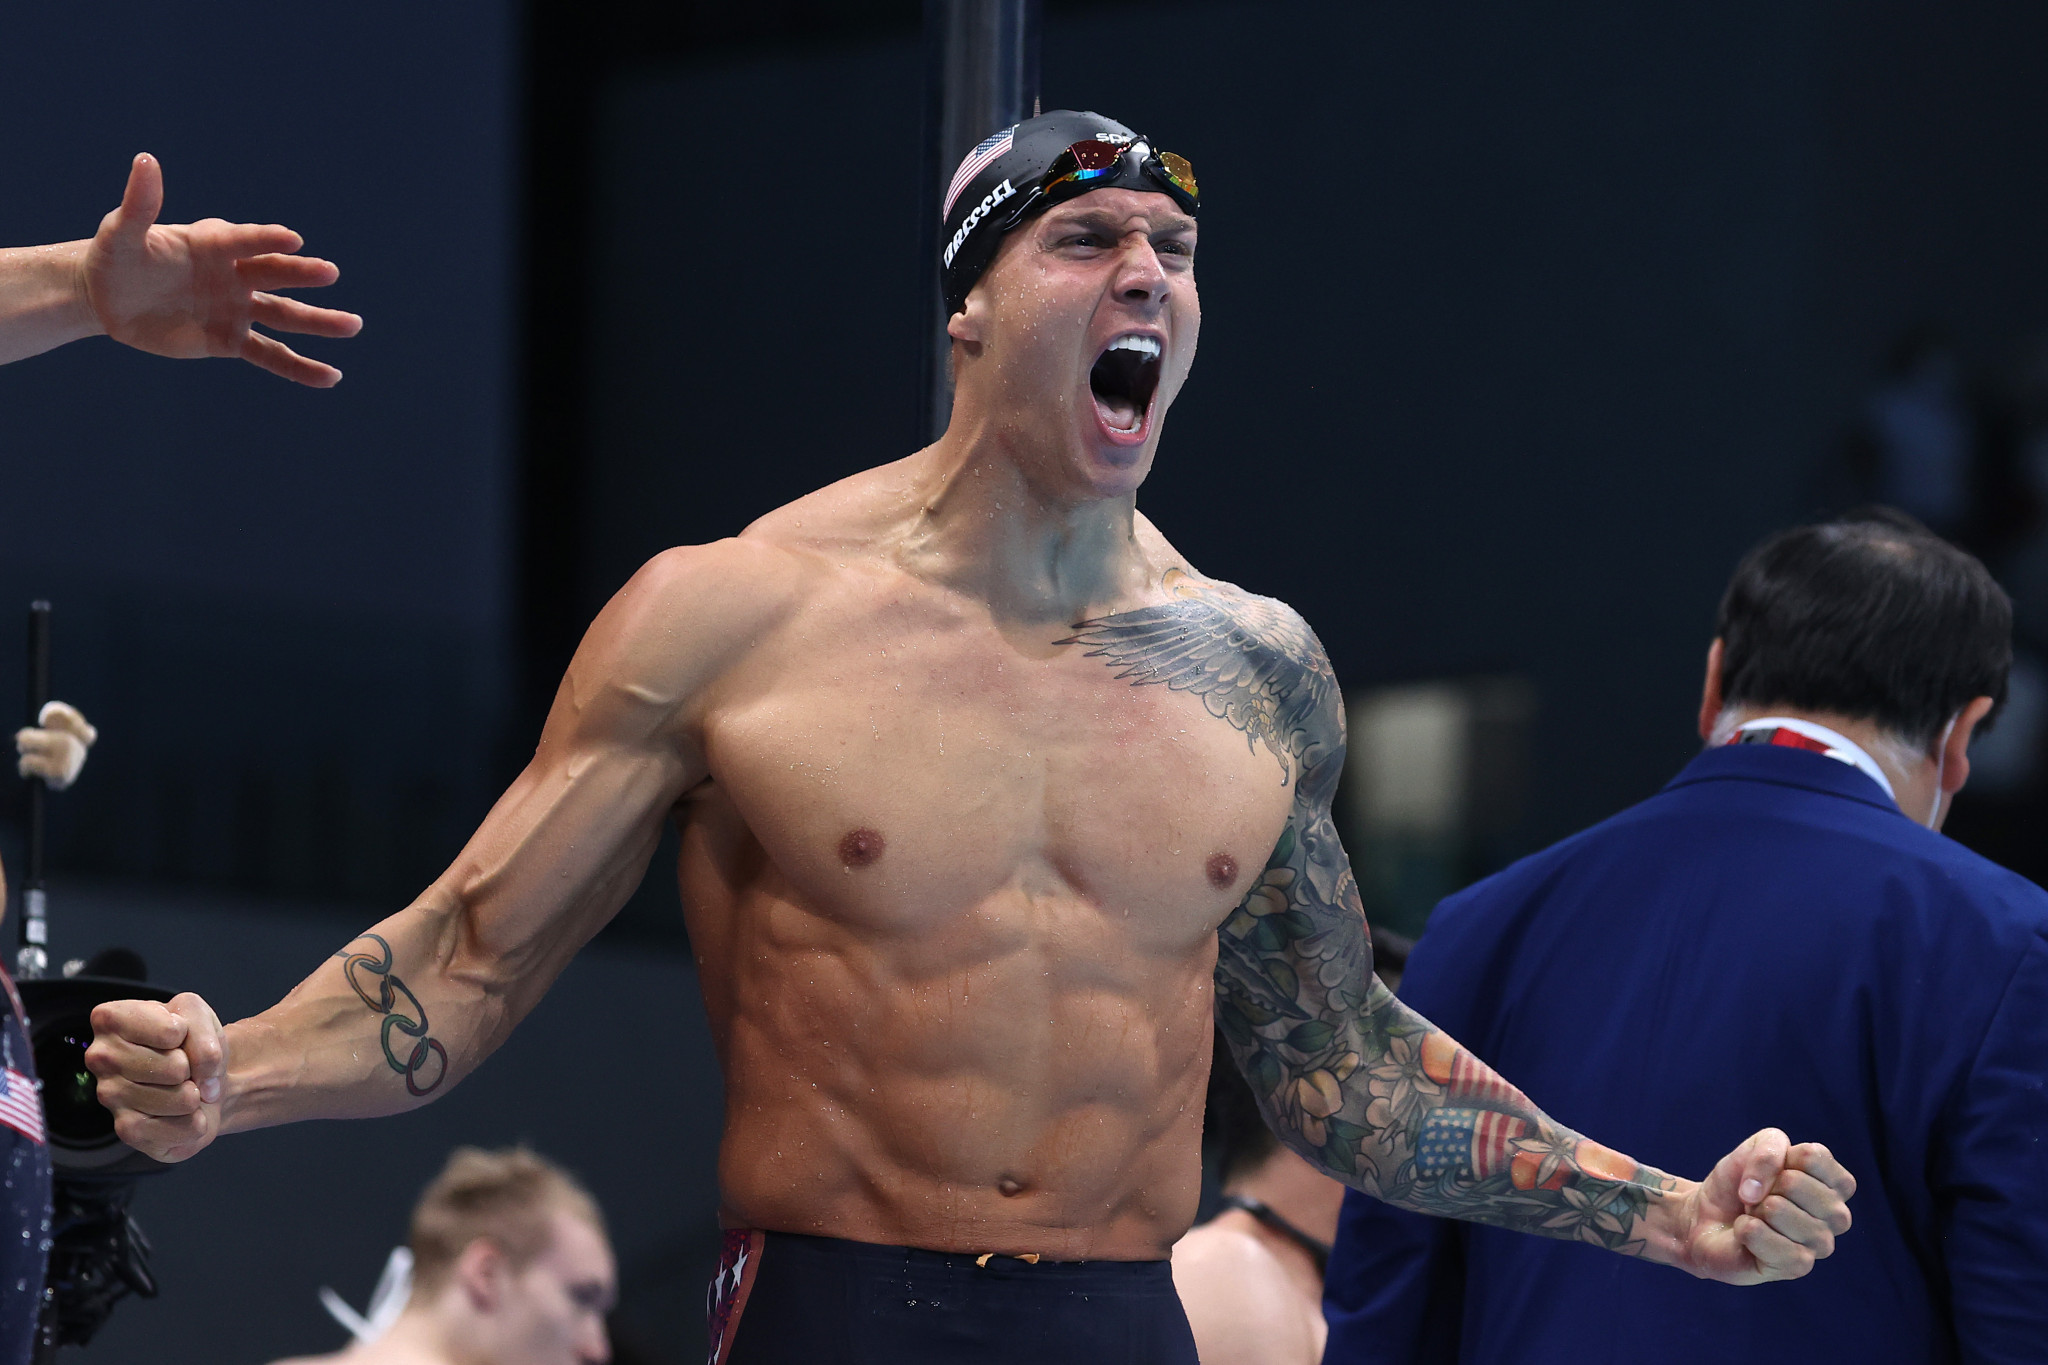 Dressel and McKeon make more history as swimming concludes at Tokyo 2020 Olympics